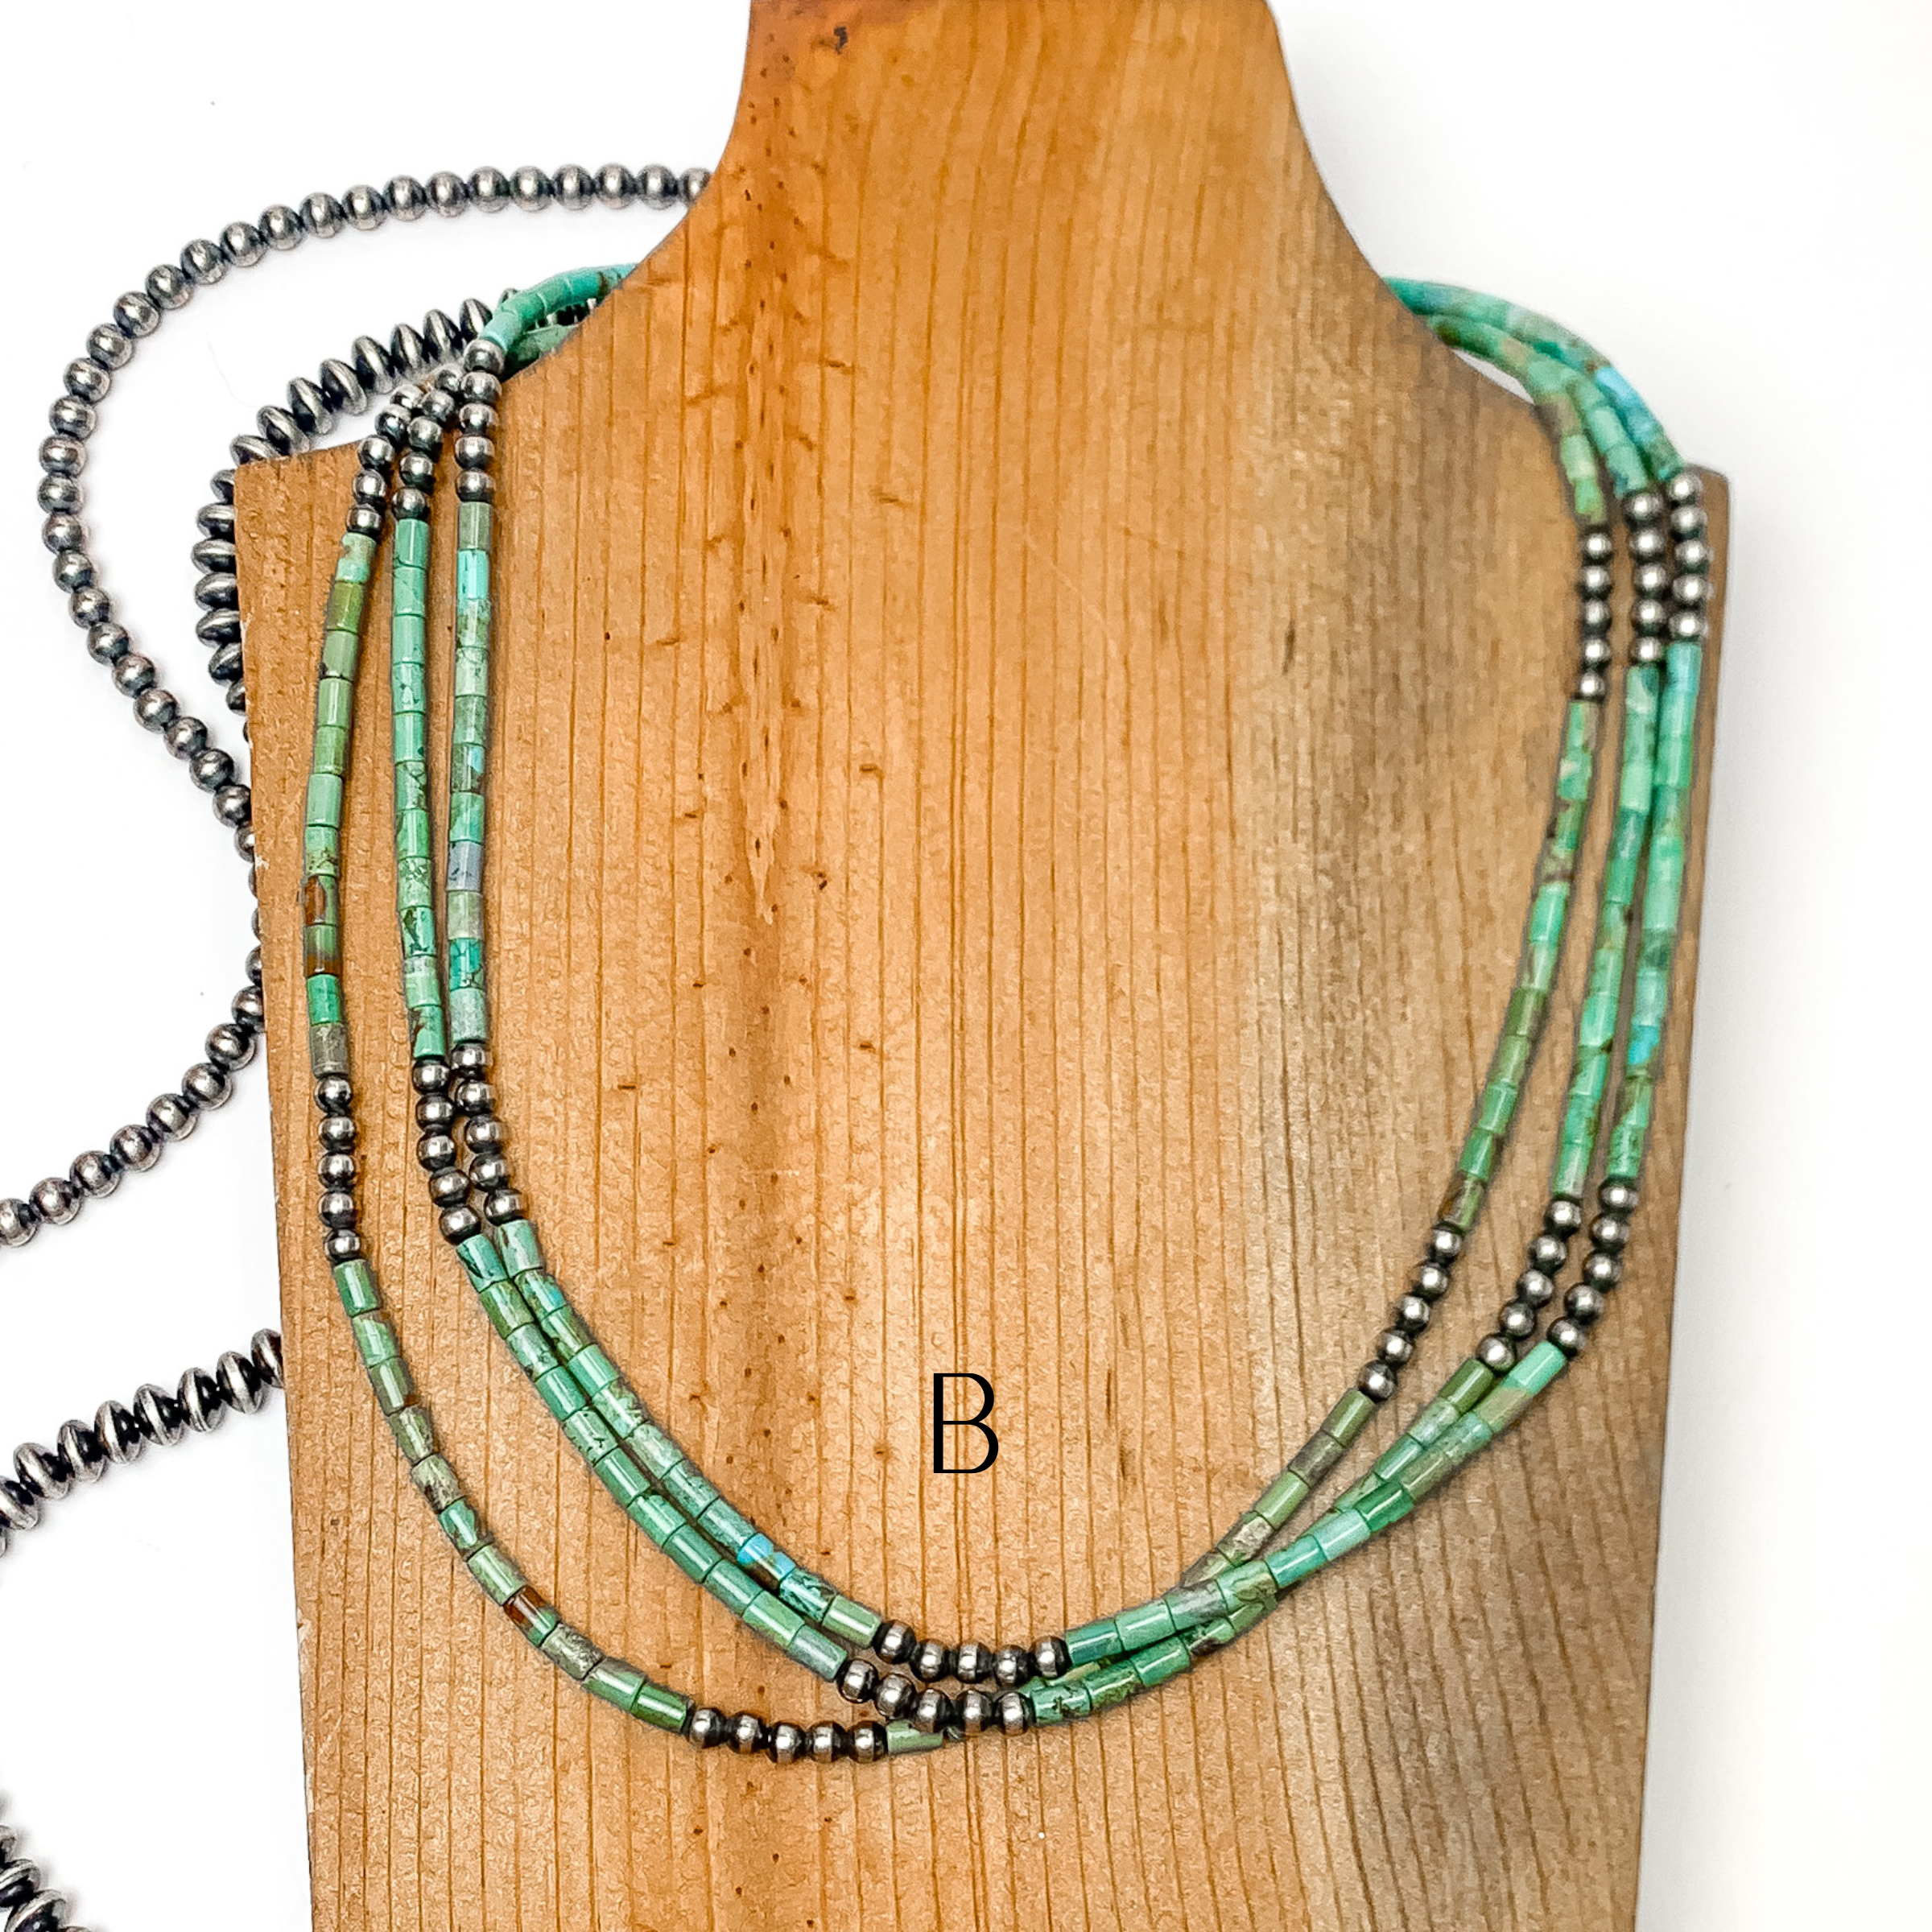 Navajo | Navajo Handmade Sterling Silver 3 Strand Turquoise Beaded Necklace with Navajo Pearls - Giddy Up Glamour Boutique